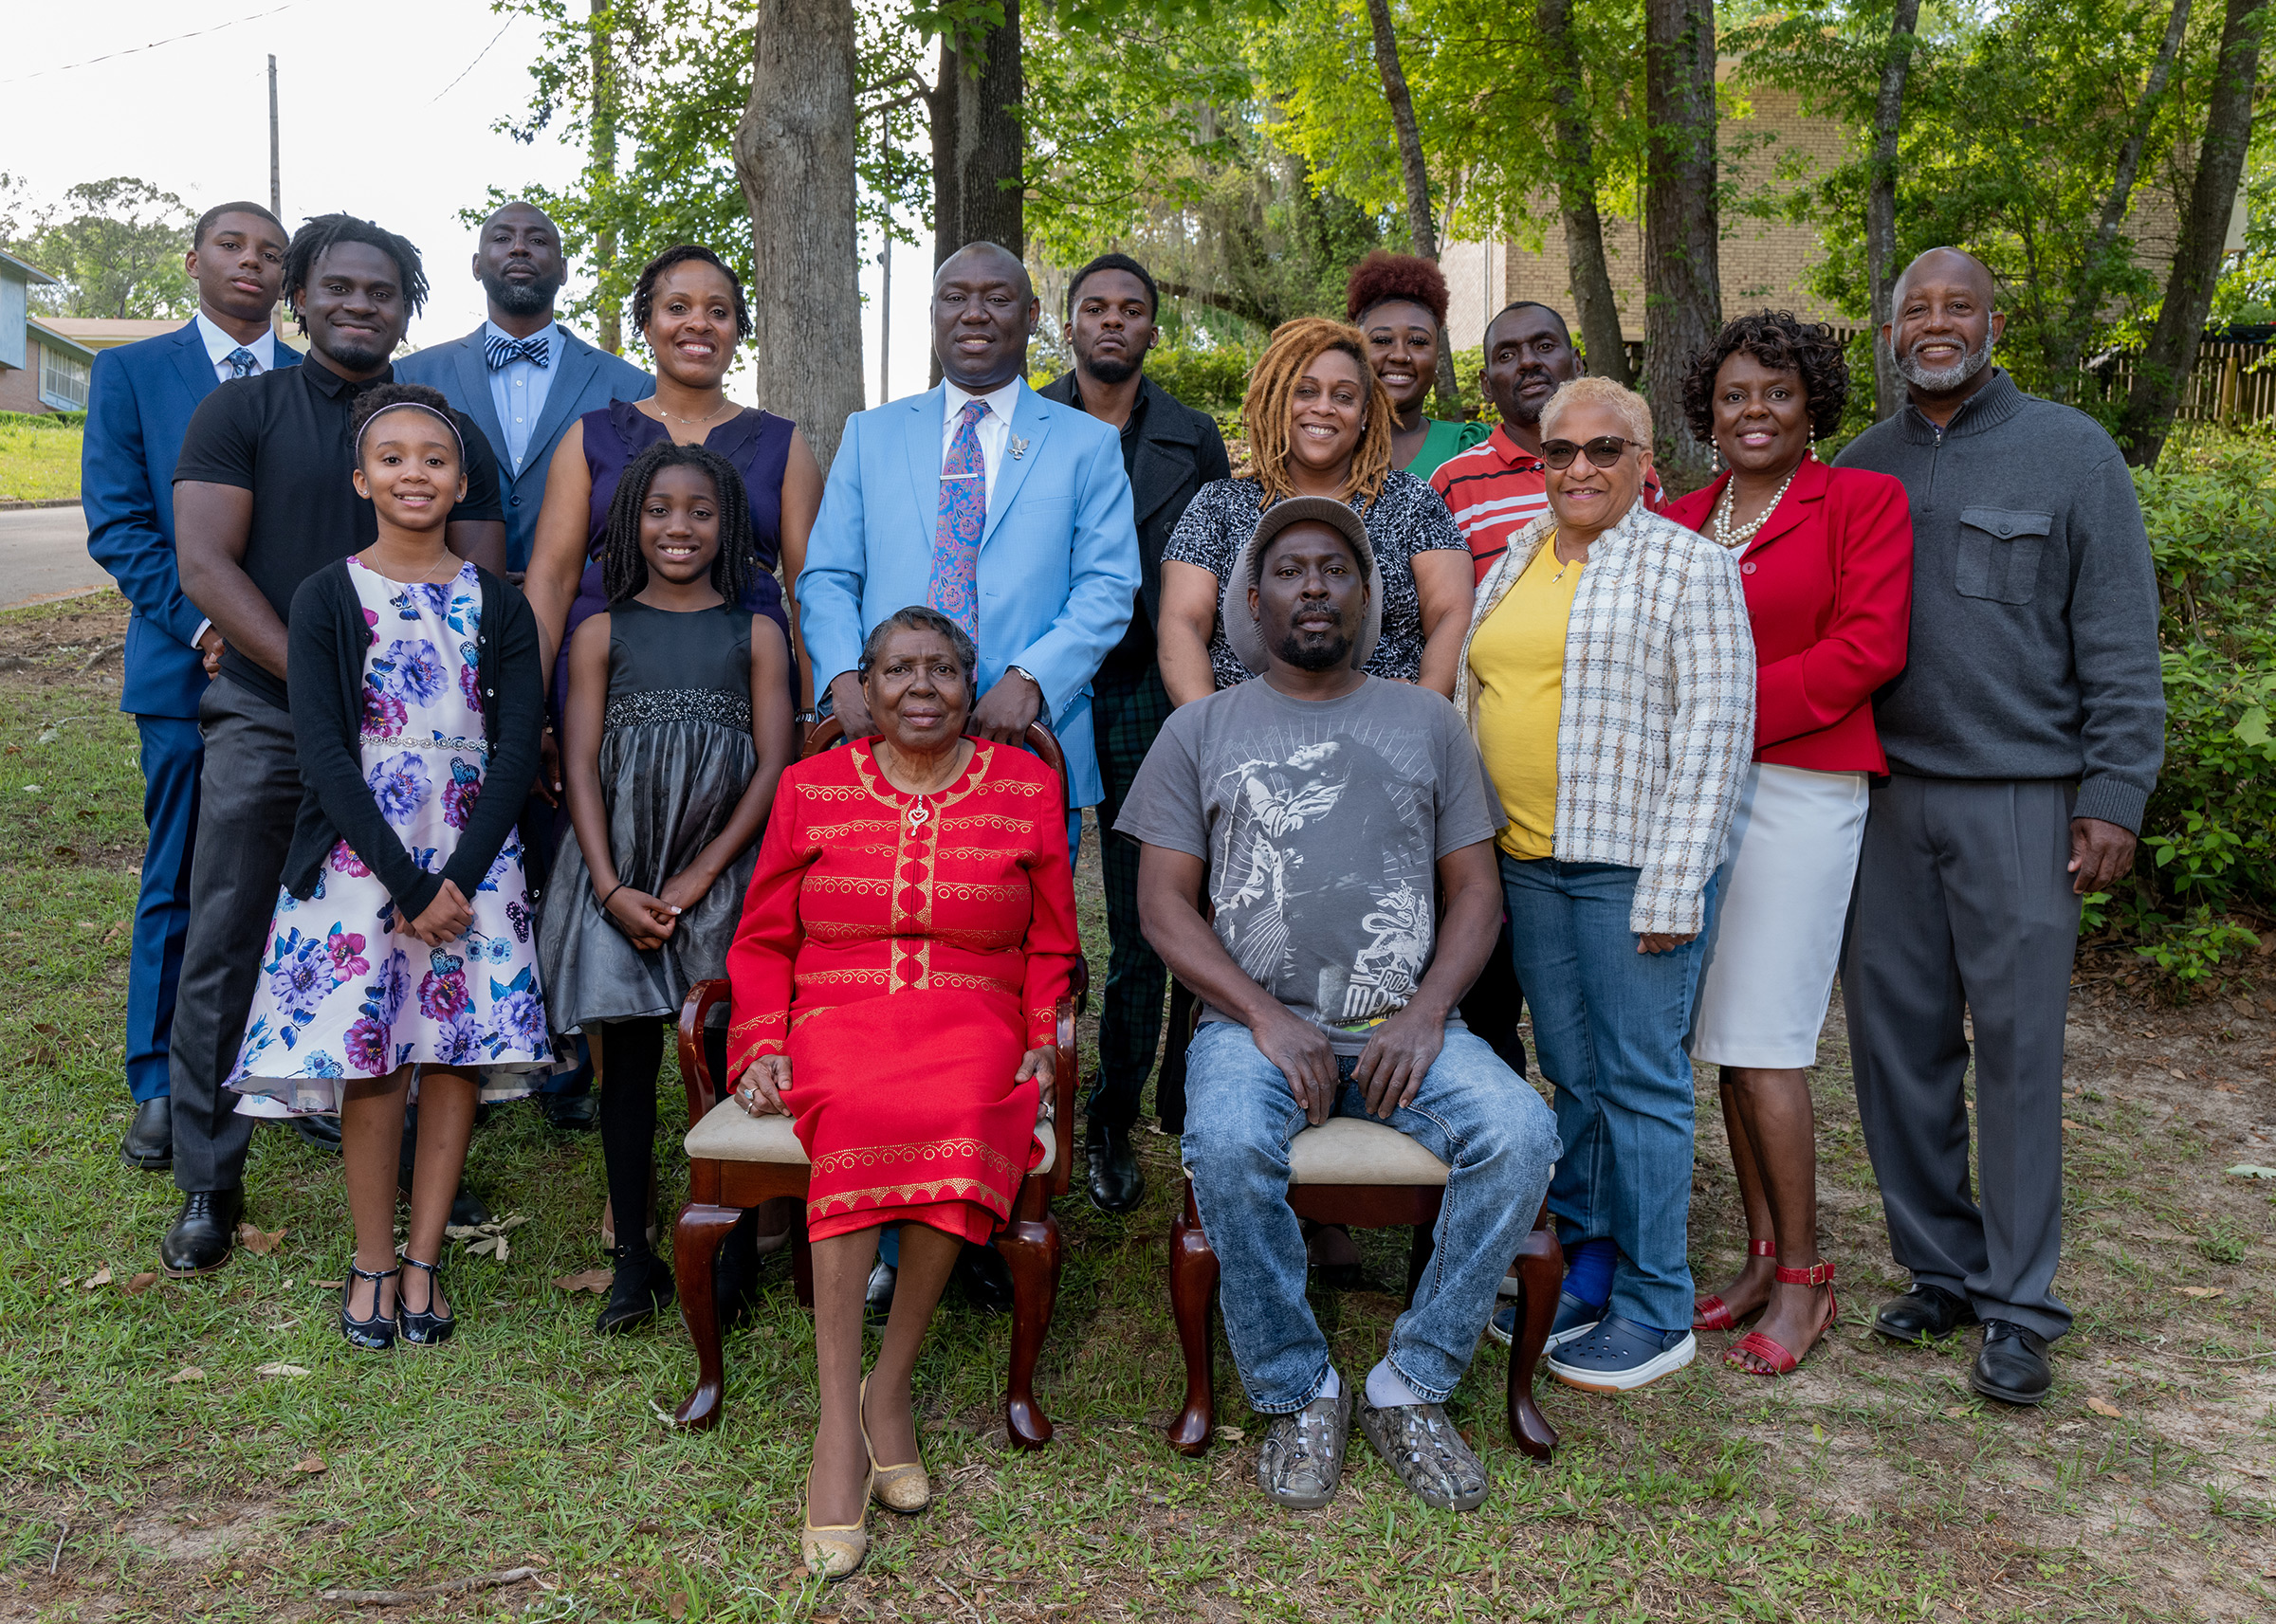 Crump stands behind his mother as the family poses for a photo on Easter Sunday, in Tallahassee, Fla., on April 4. (Ruddy Roye for TIME)